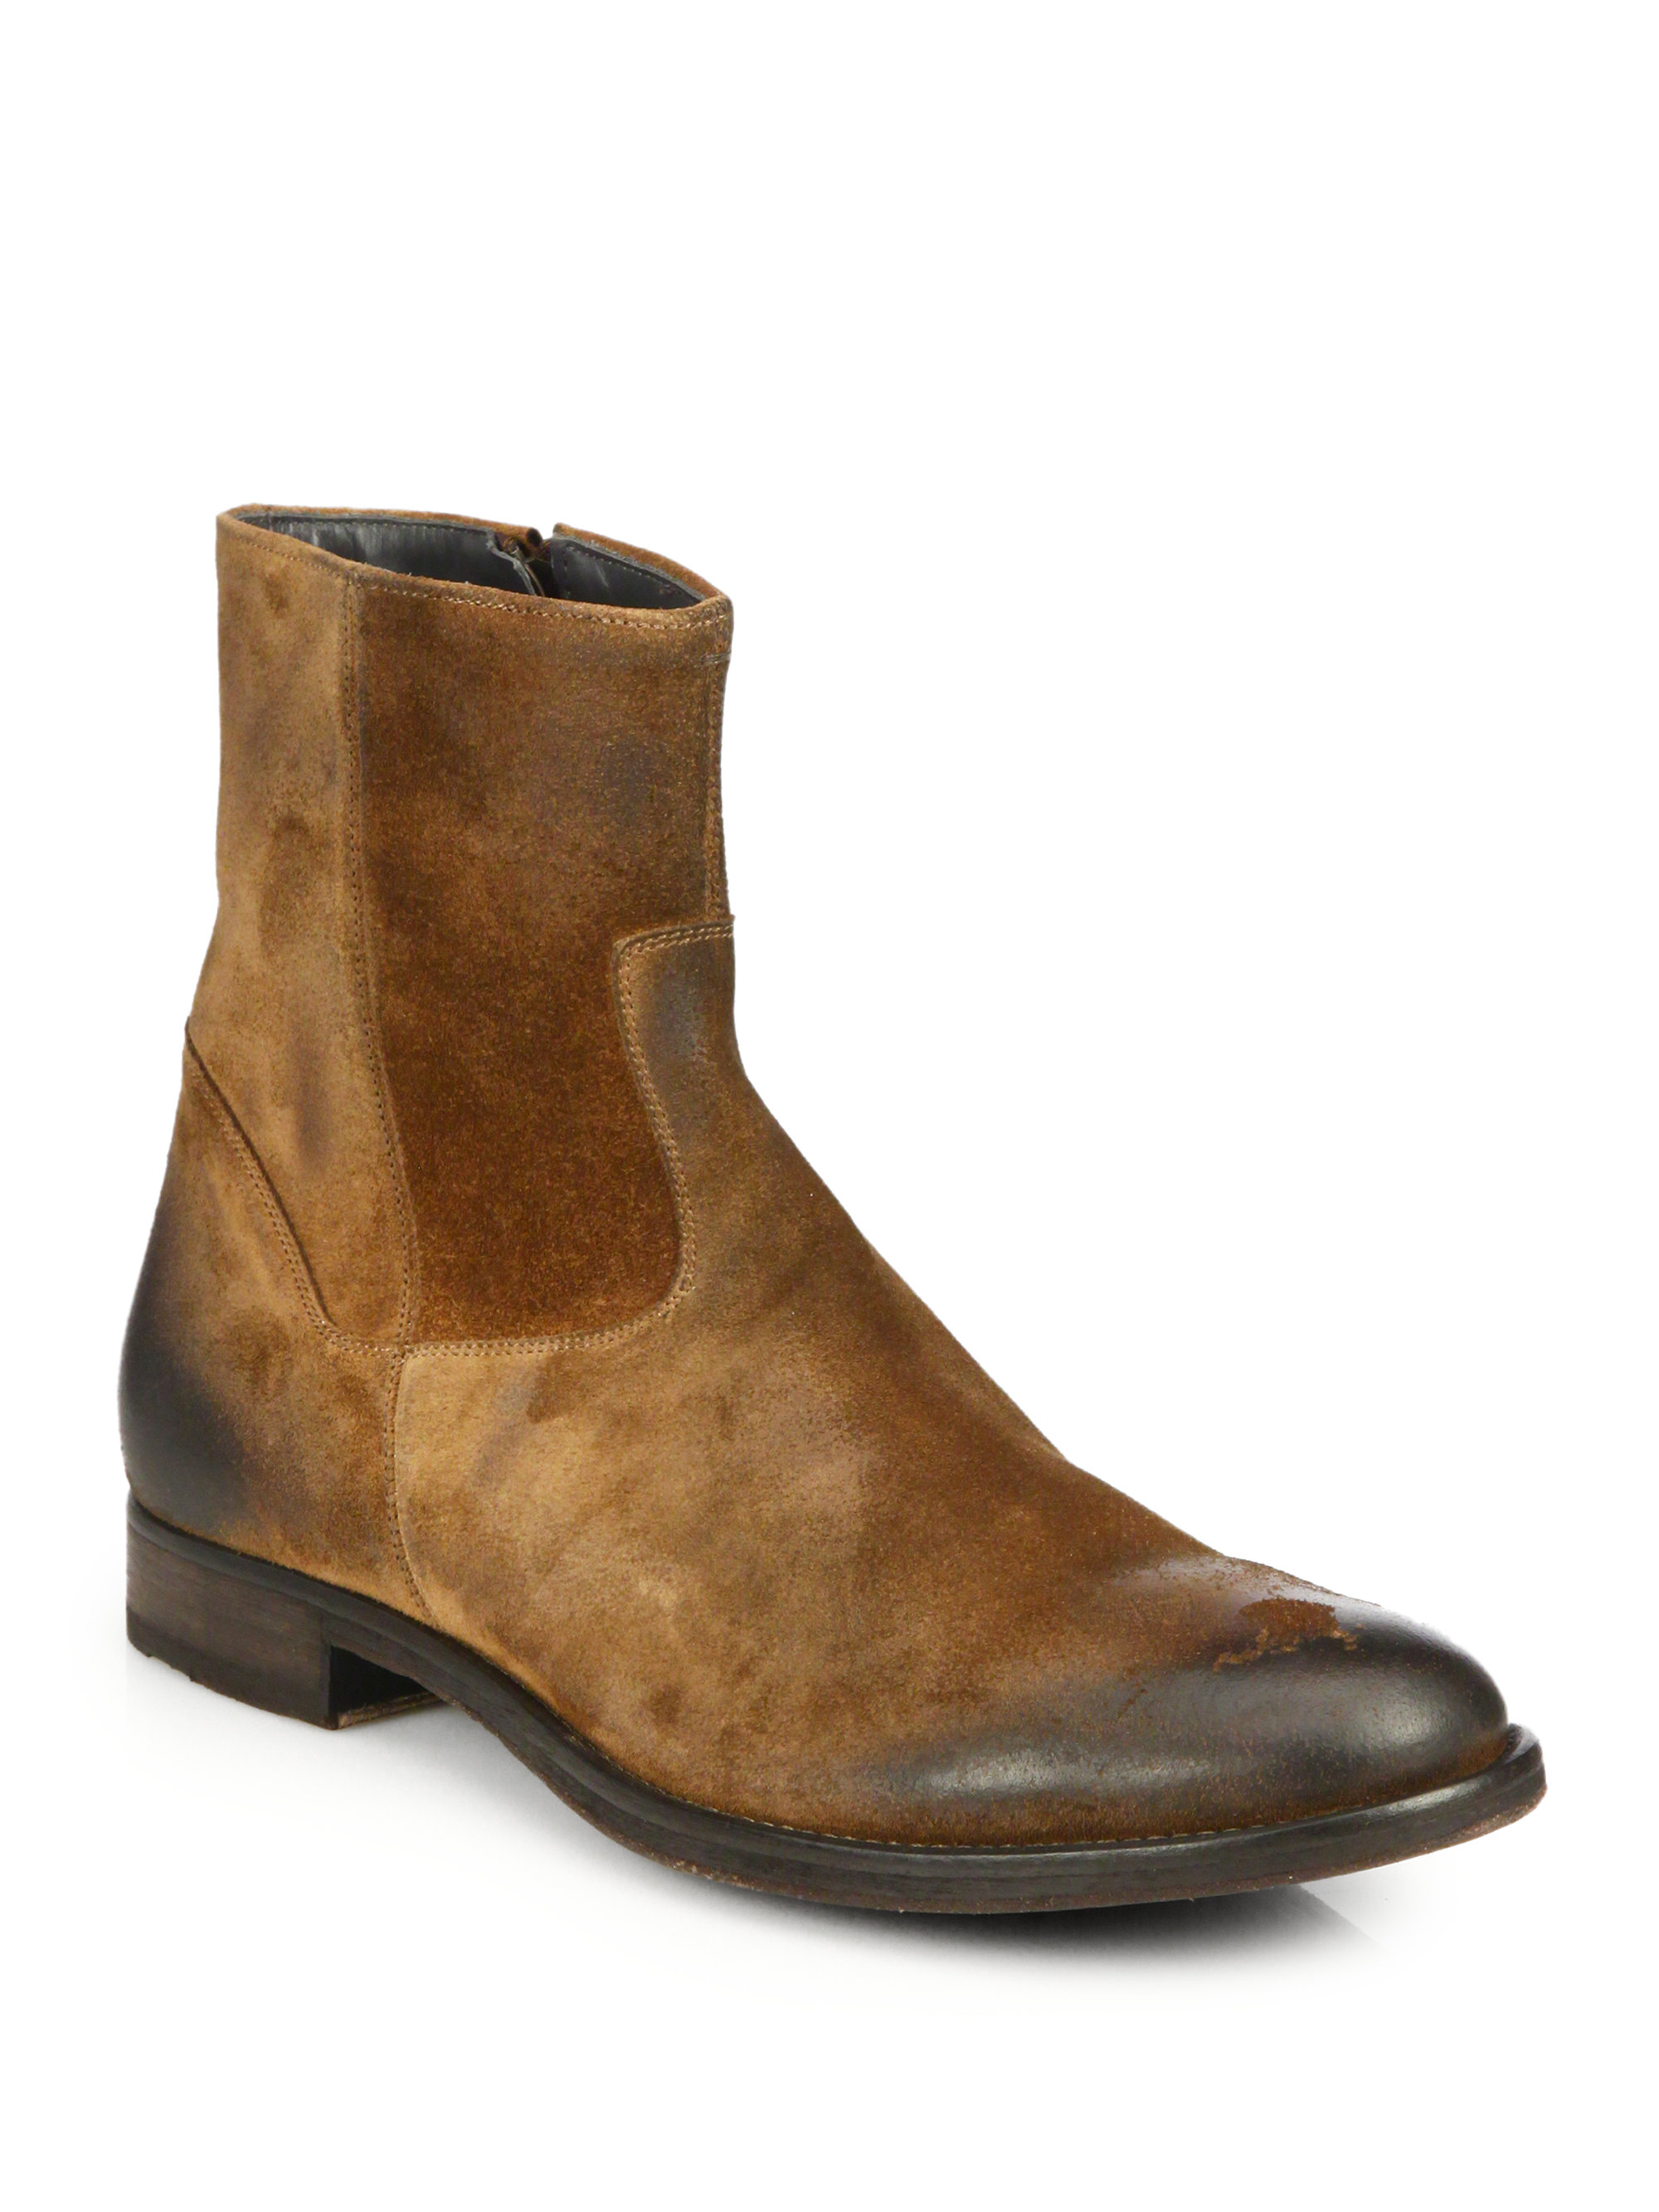 Lyst - To Boot Greyson Suede Zip-Up Boots in Brown for Men